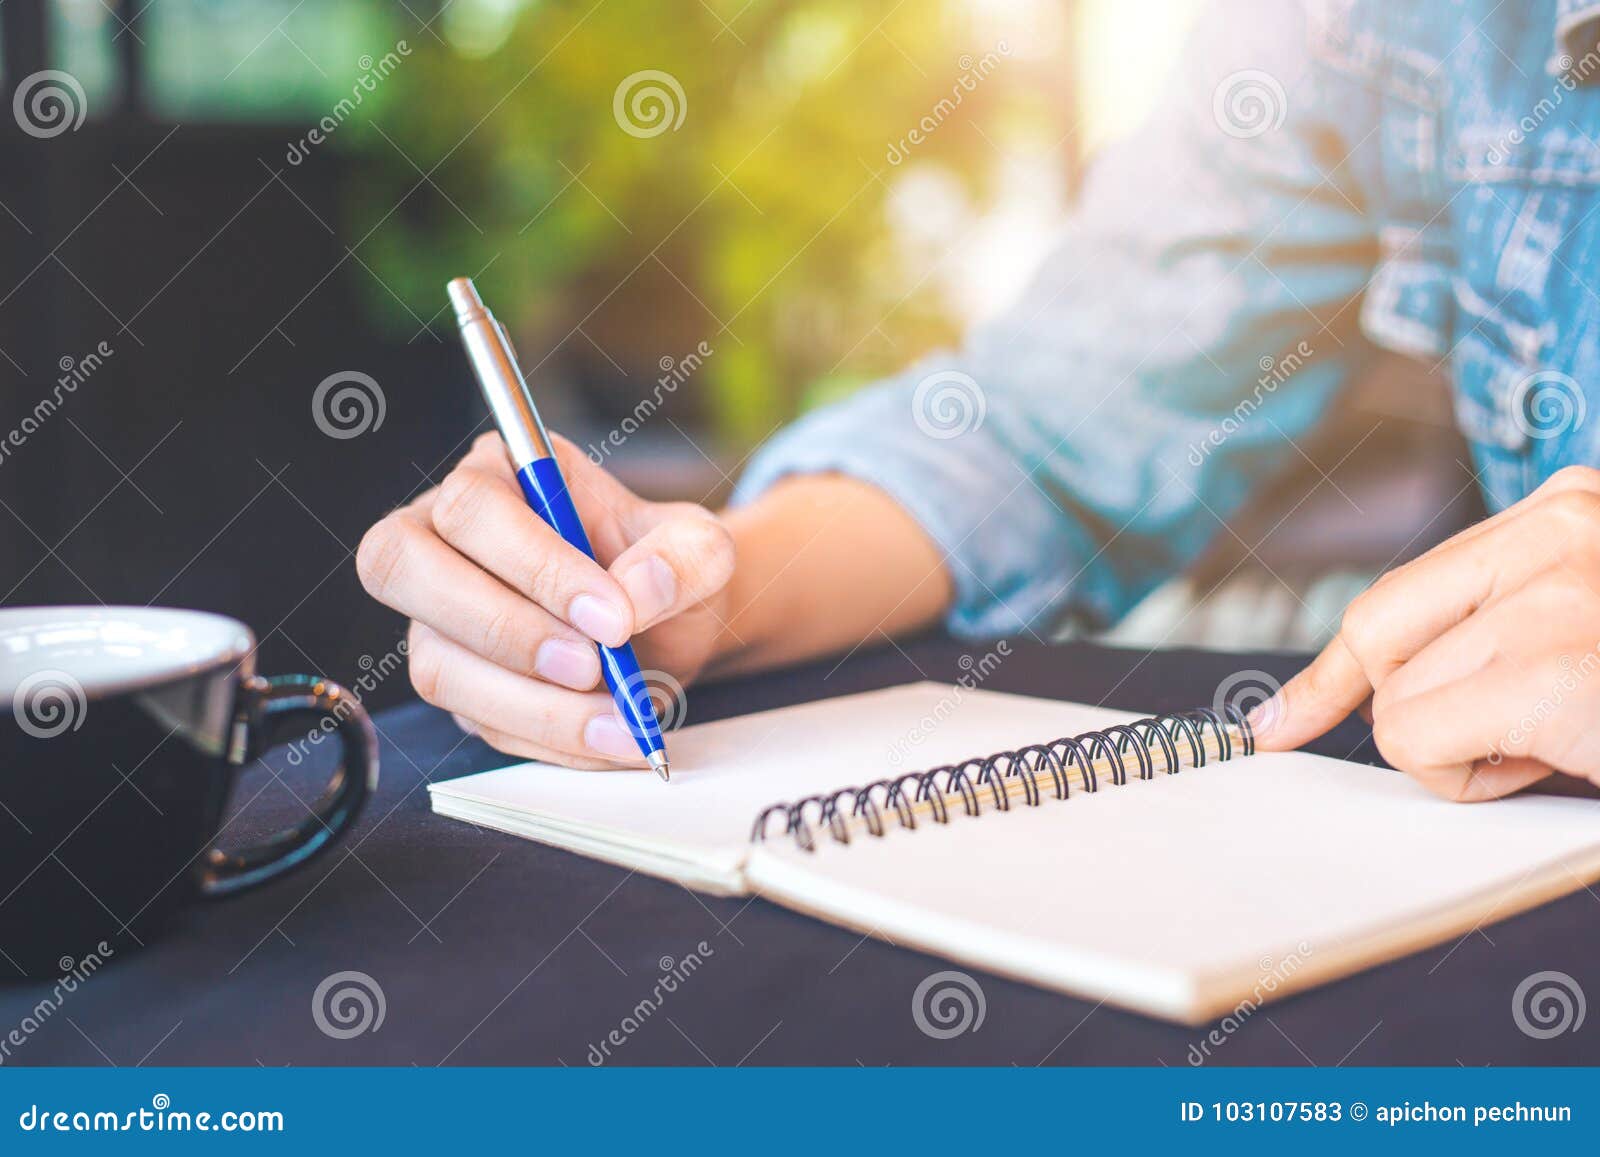 How to Find the Best Foray Pens for Writing and Office Work in 2023